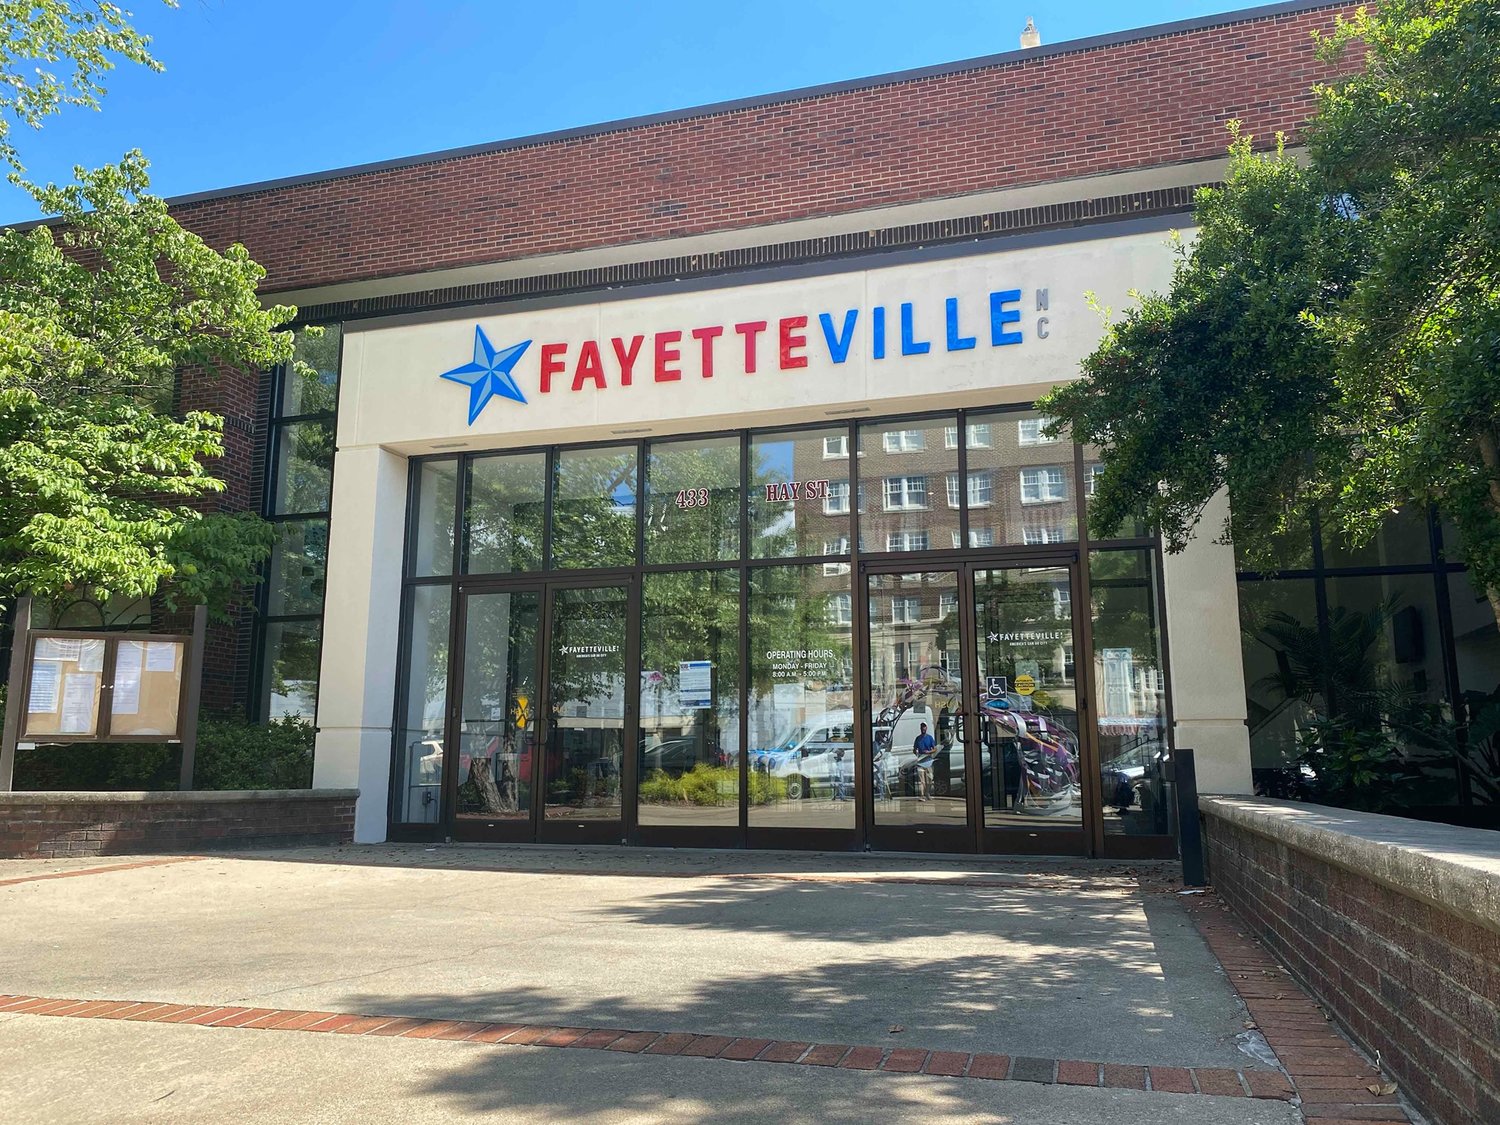 The Fayetteville City Council will evaluate the city manager and the city attorney during a special meeting Wednesday.